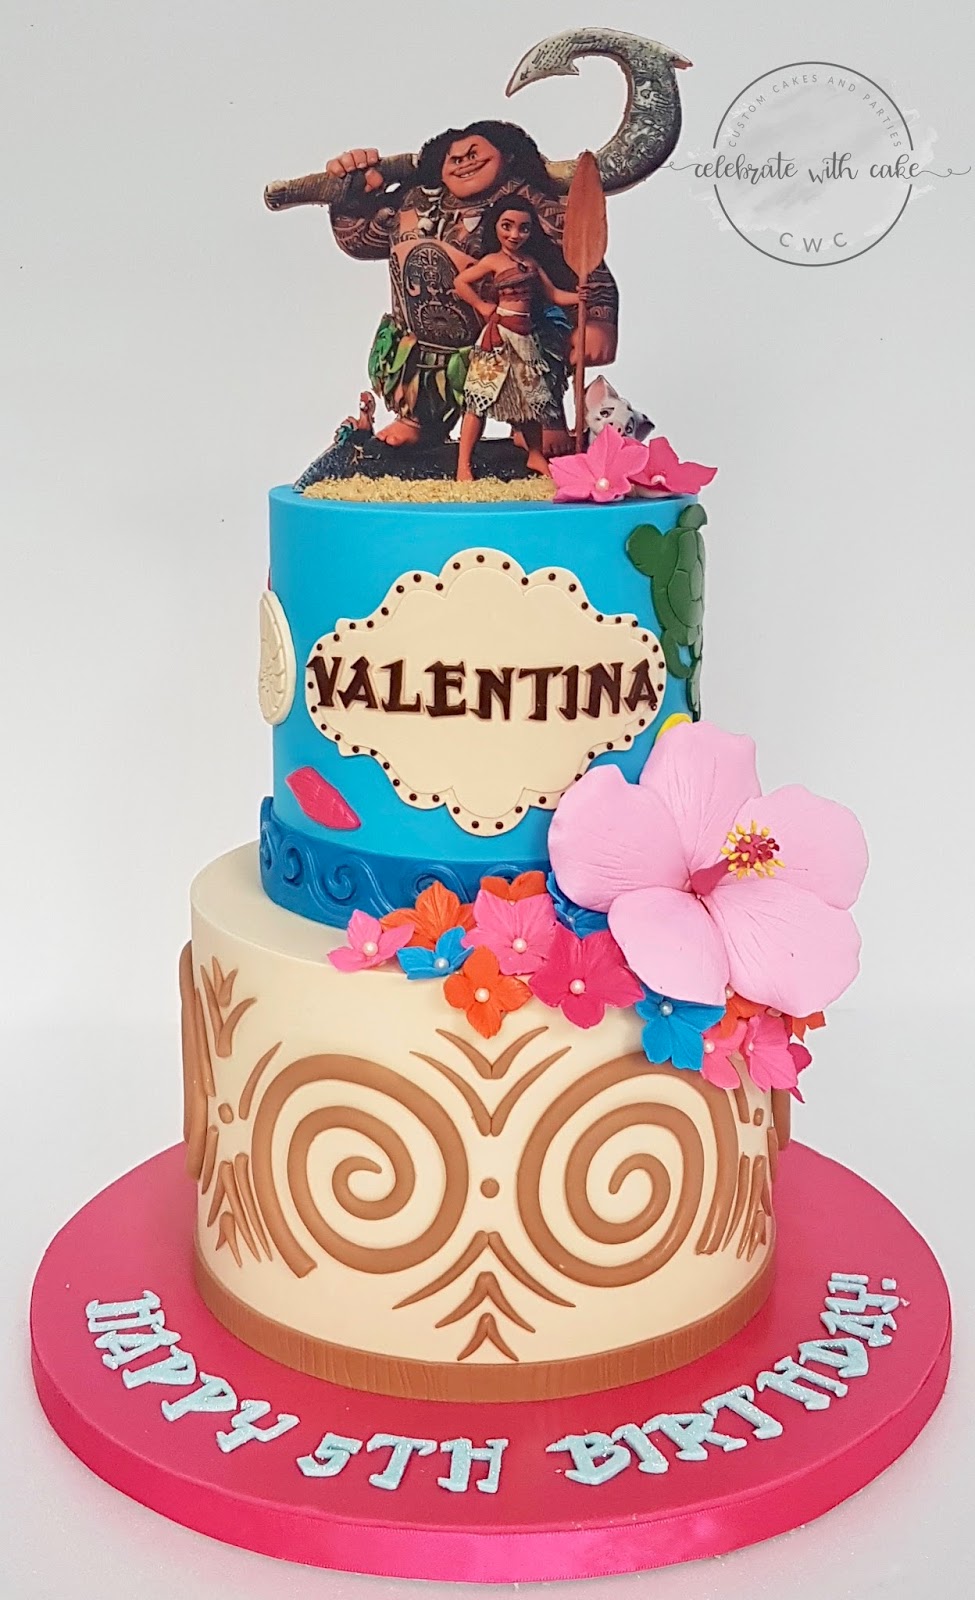 Celebrate With Cake Moana Themed 2 Tiers Cake - moana and roblox beach party birthday party ideas photo 5 of 11